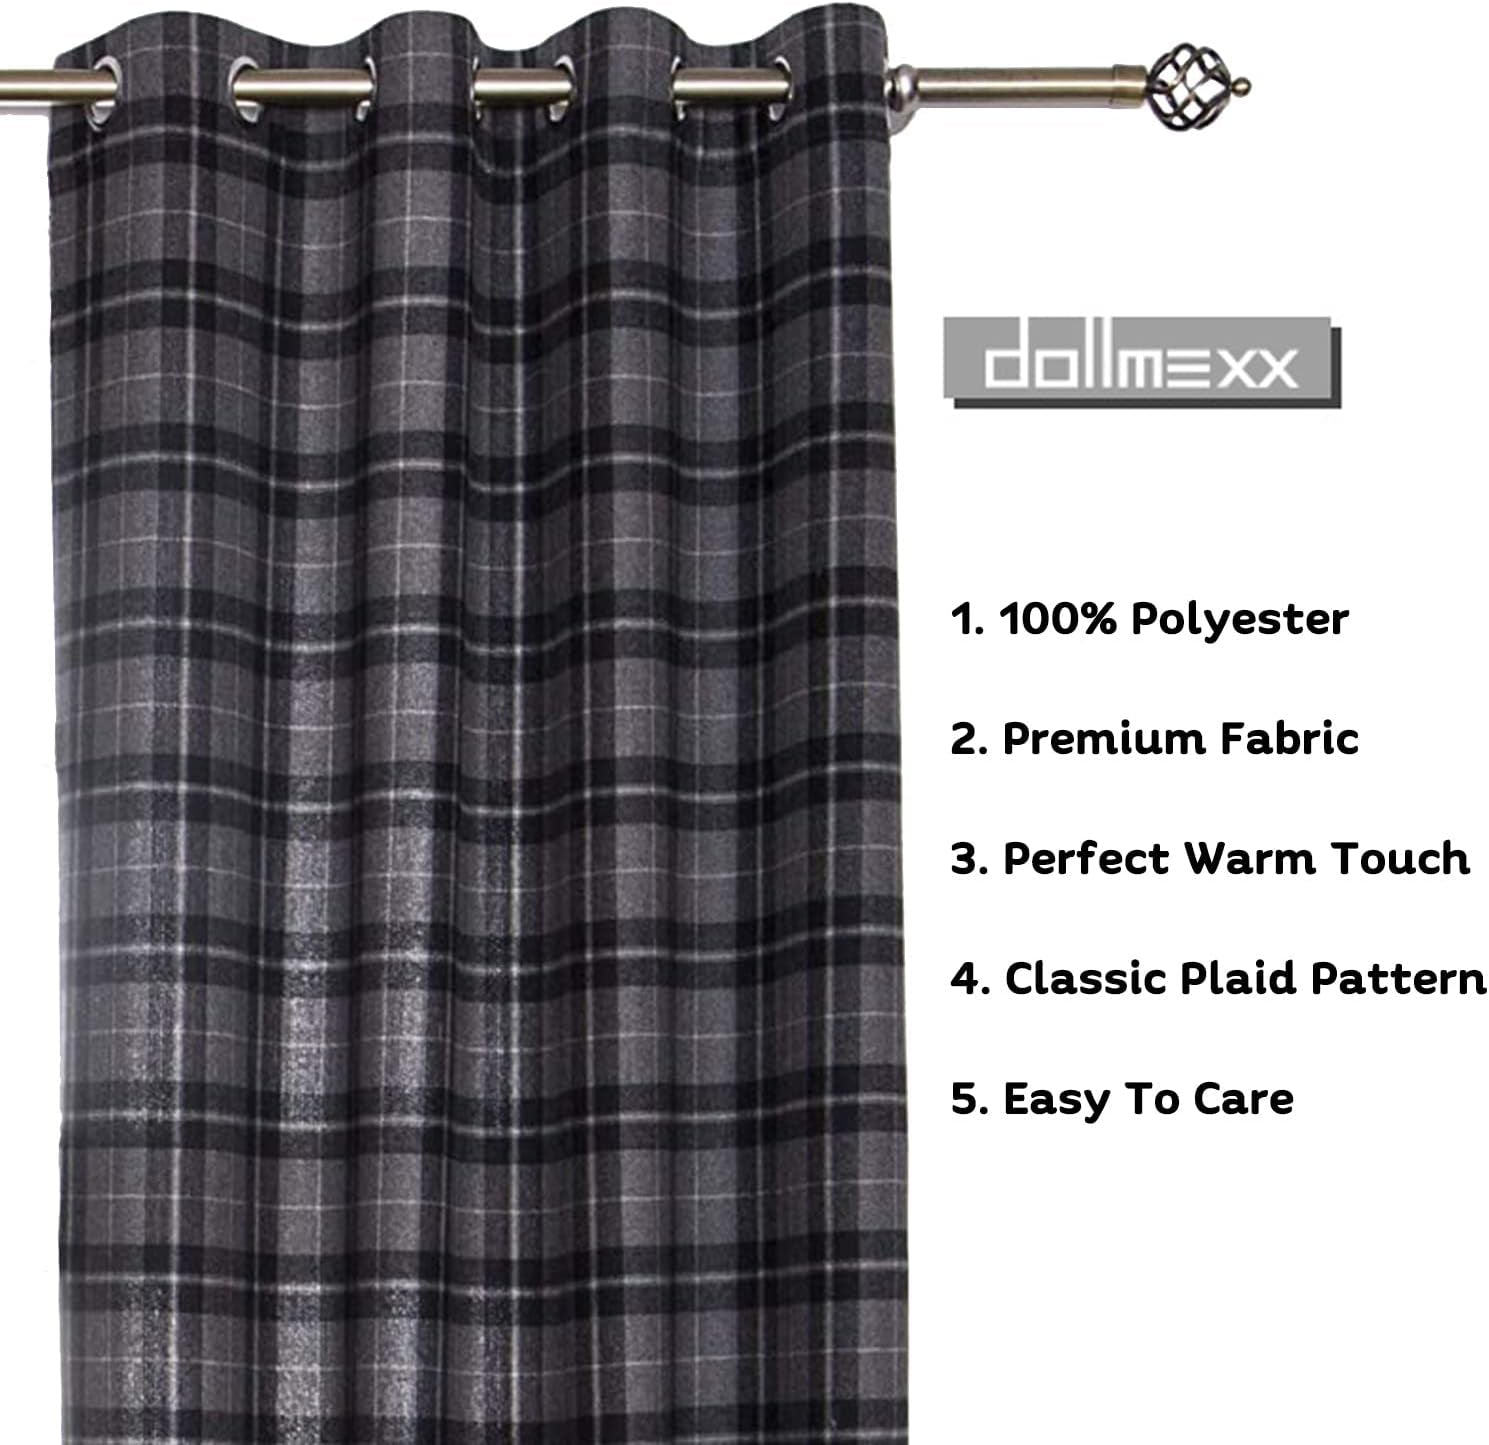 DOLLMEXX Plaid Window Curtains for Bedroom,Lumberjack Fashion Buffalo Style Checks Pattern Retro Style with Grid Composition, Living Room Window Drapes（2 Panels, 52"X84", Black with Grey）  DOLLMEXX   